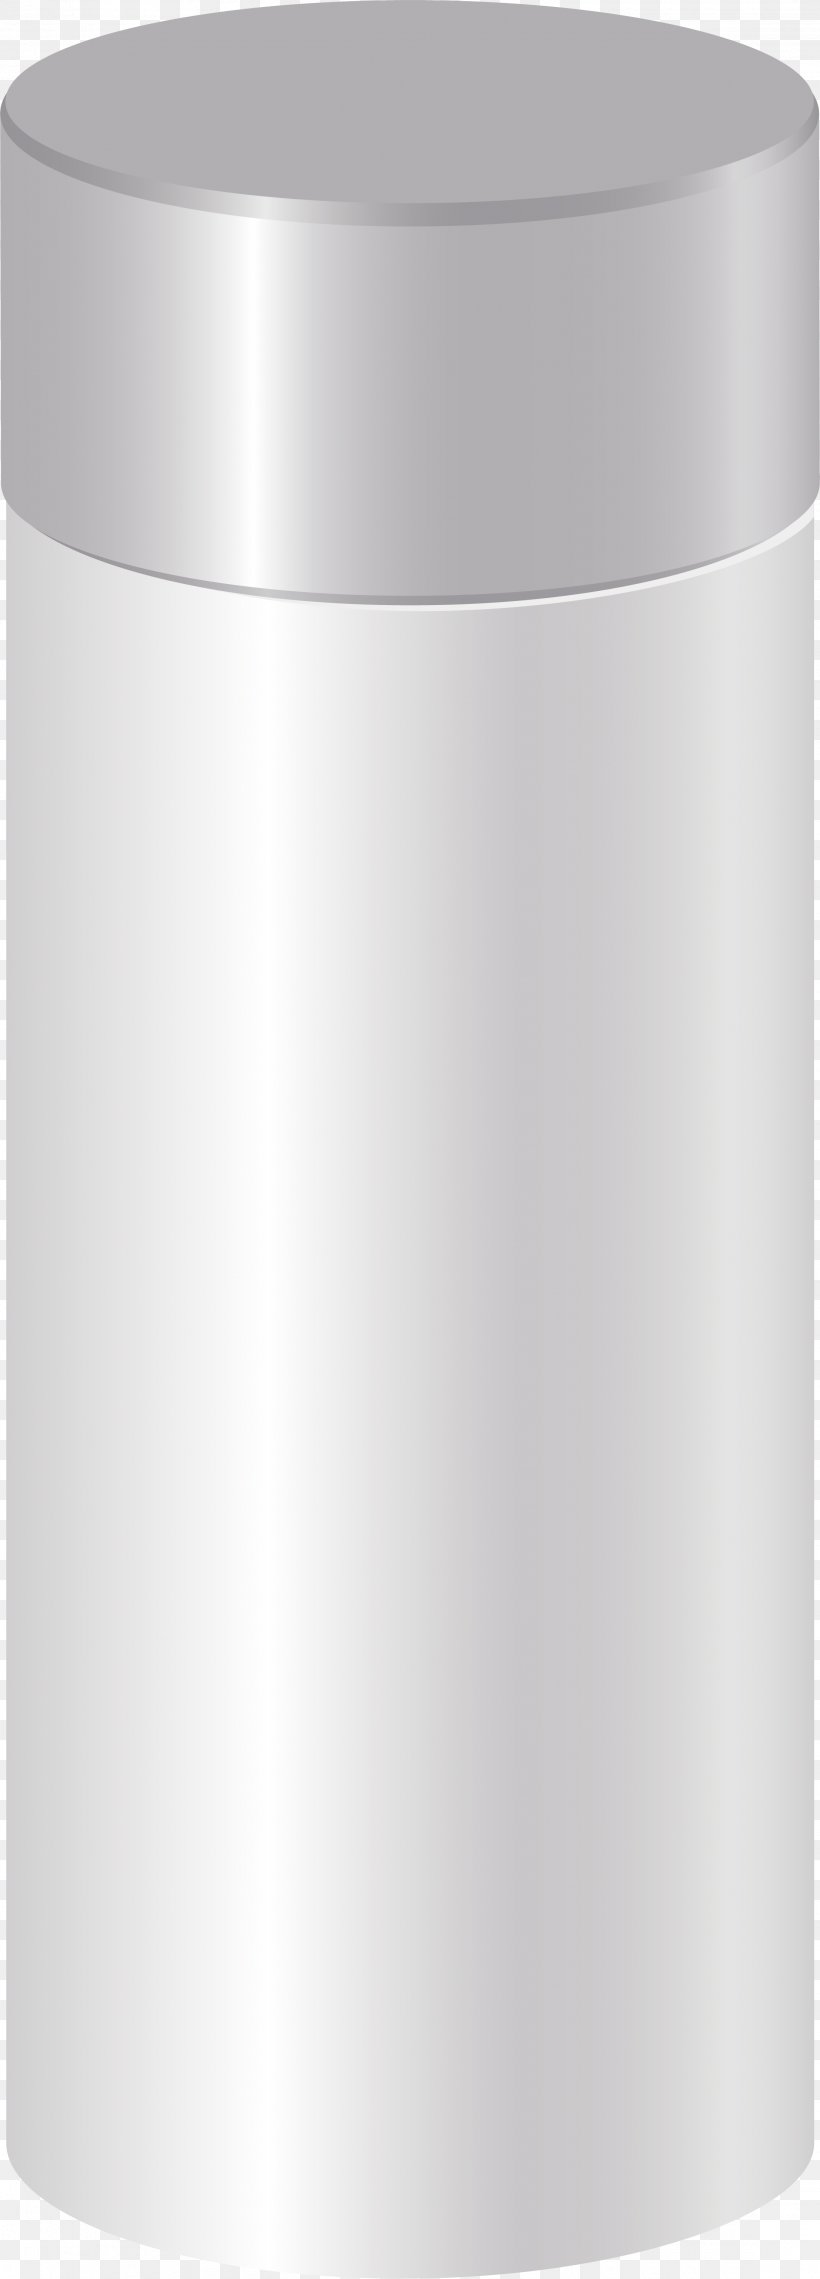 Cylinder Angle, PNG, 2220x6170px, Cylinder Download Free